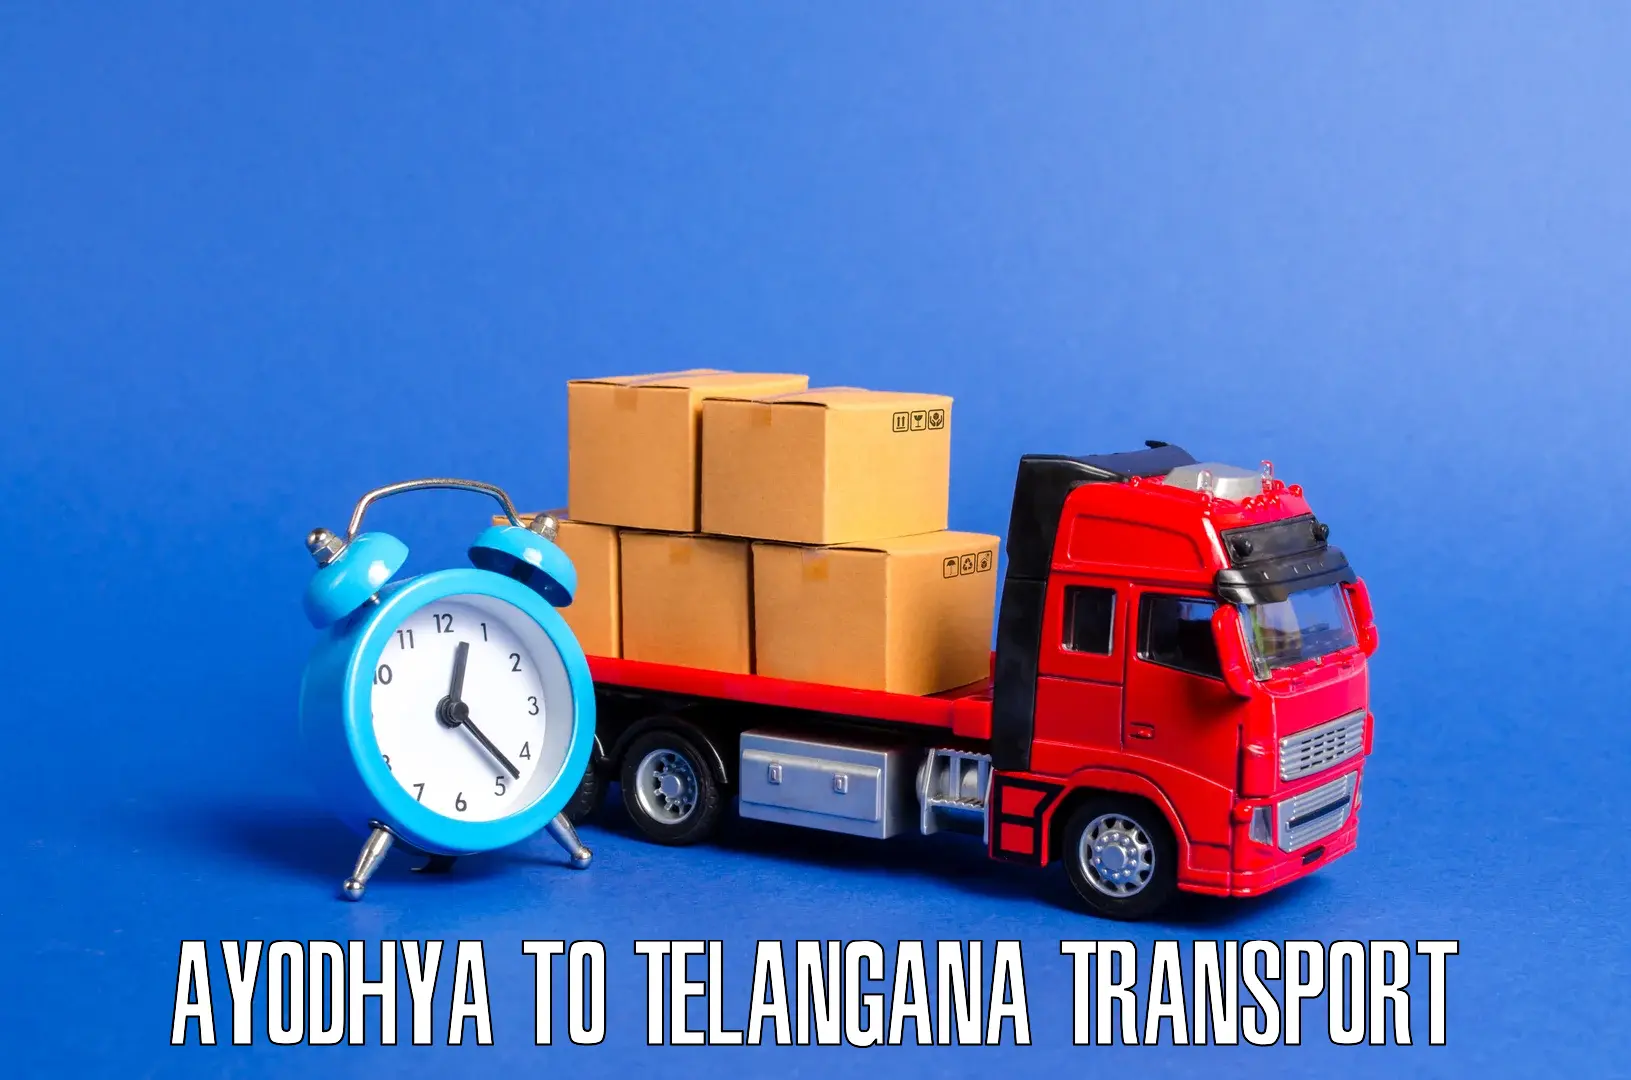 Transport bike from one state to another Ayodhya to Nalgonda